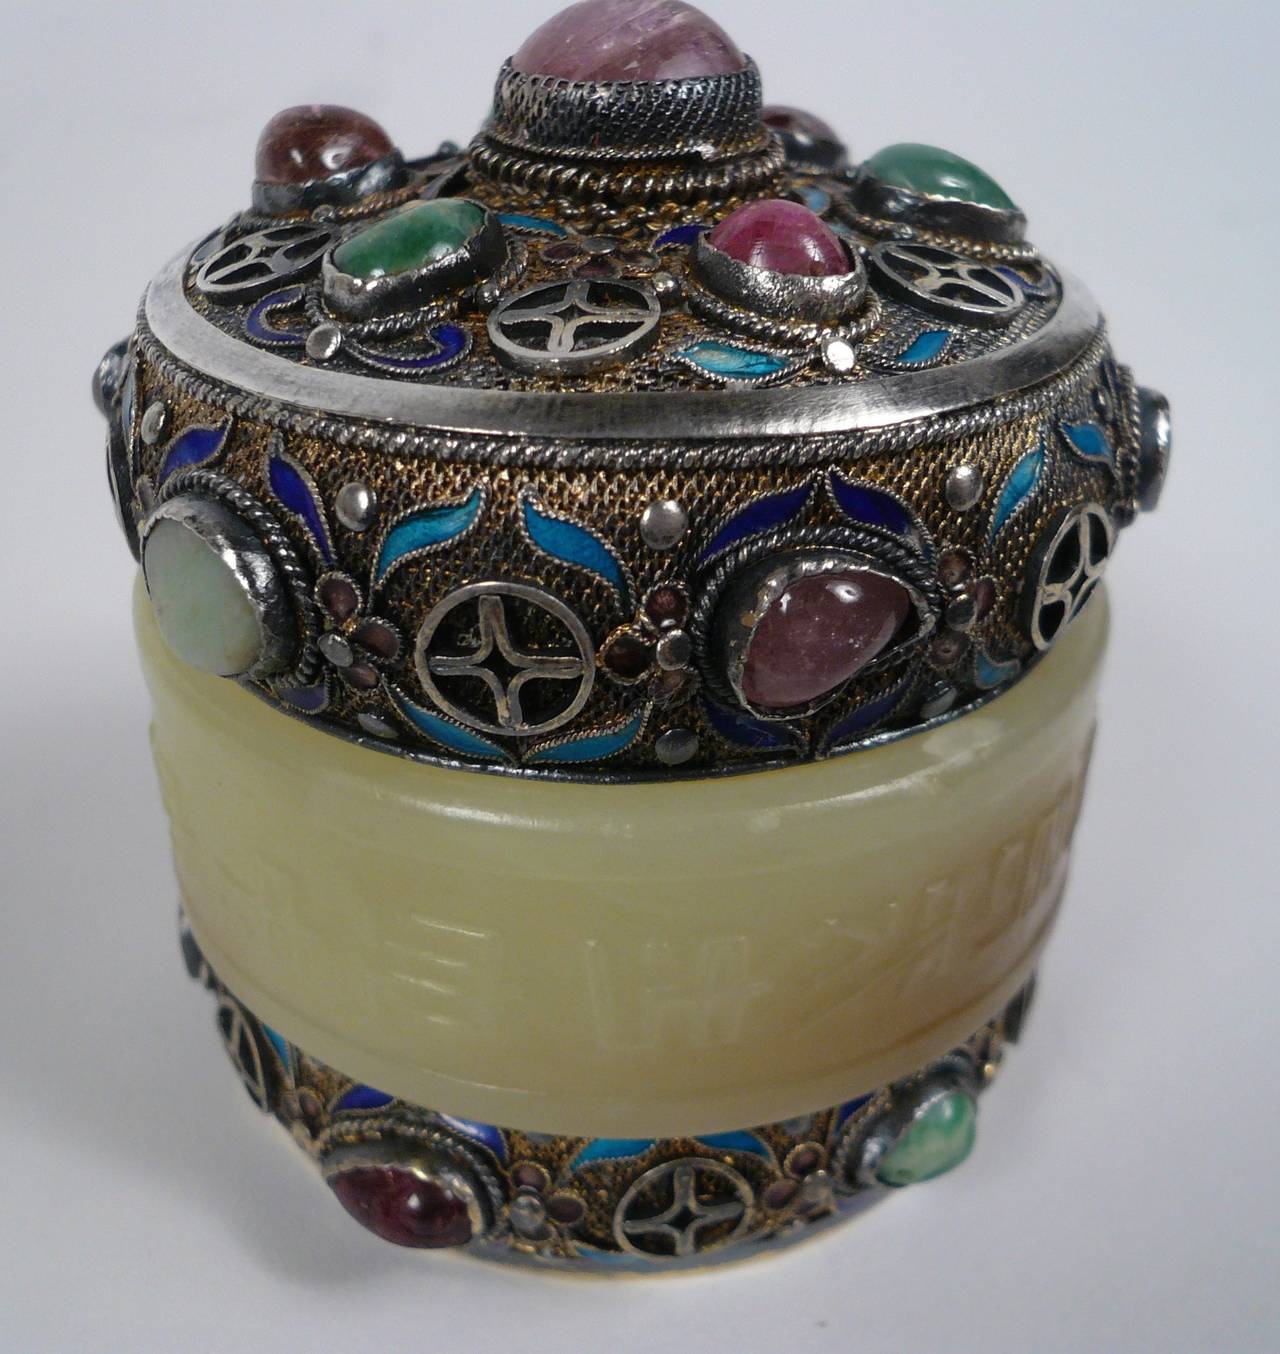 20th Century Chinese Enameled Silver, Jade, and Stone Box